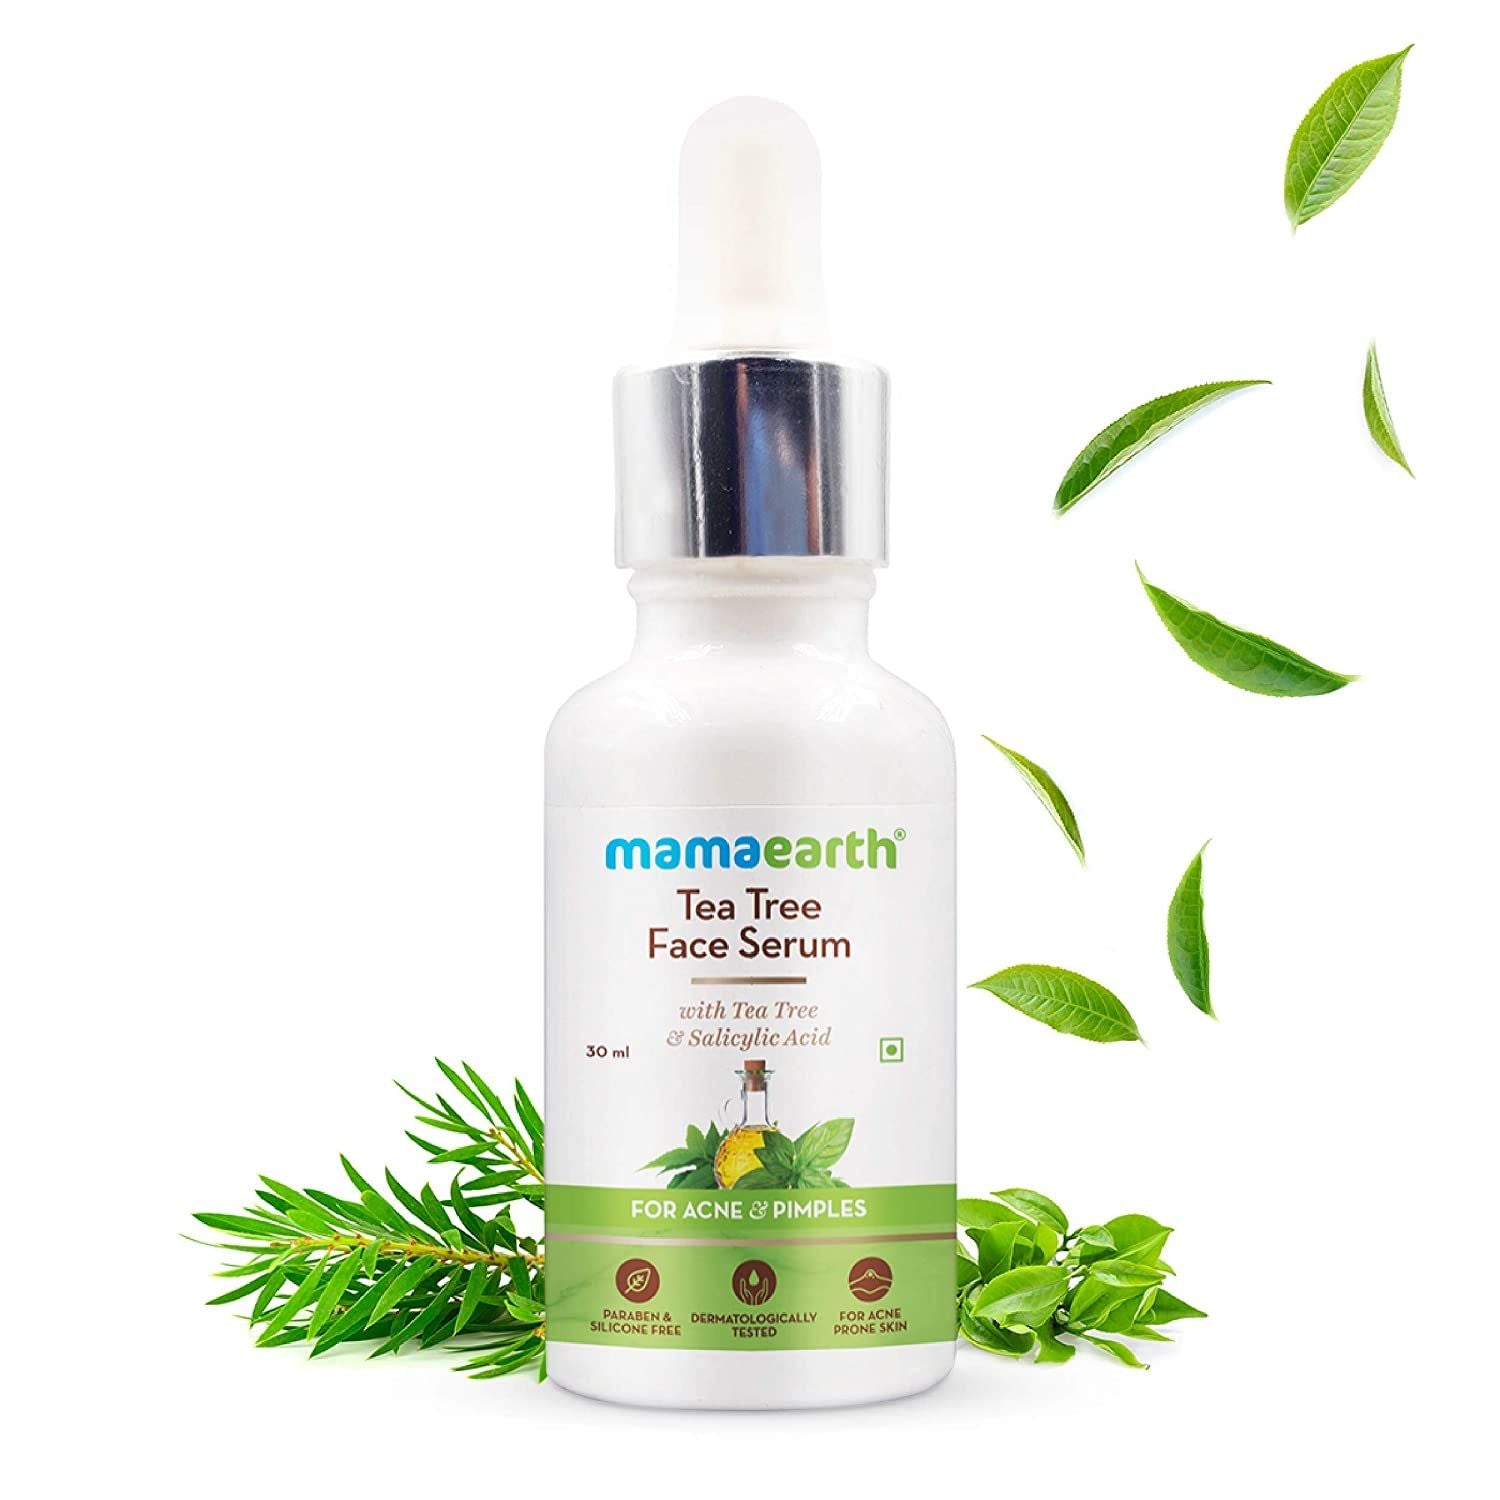 Tea Tree Face Serum for Acne and Pimples - 30 ml